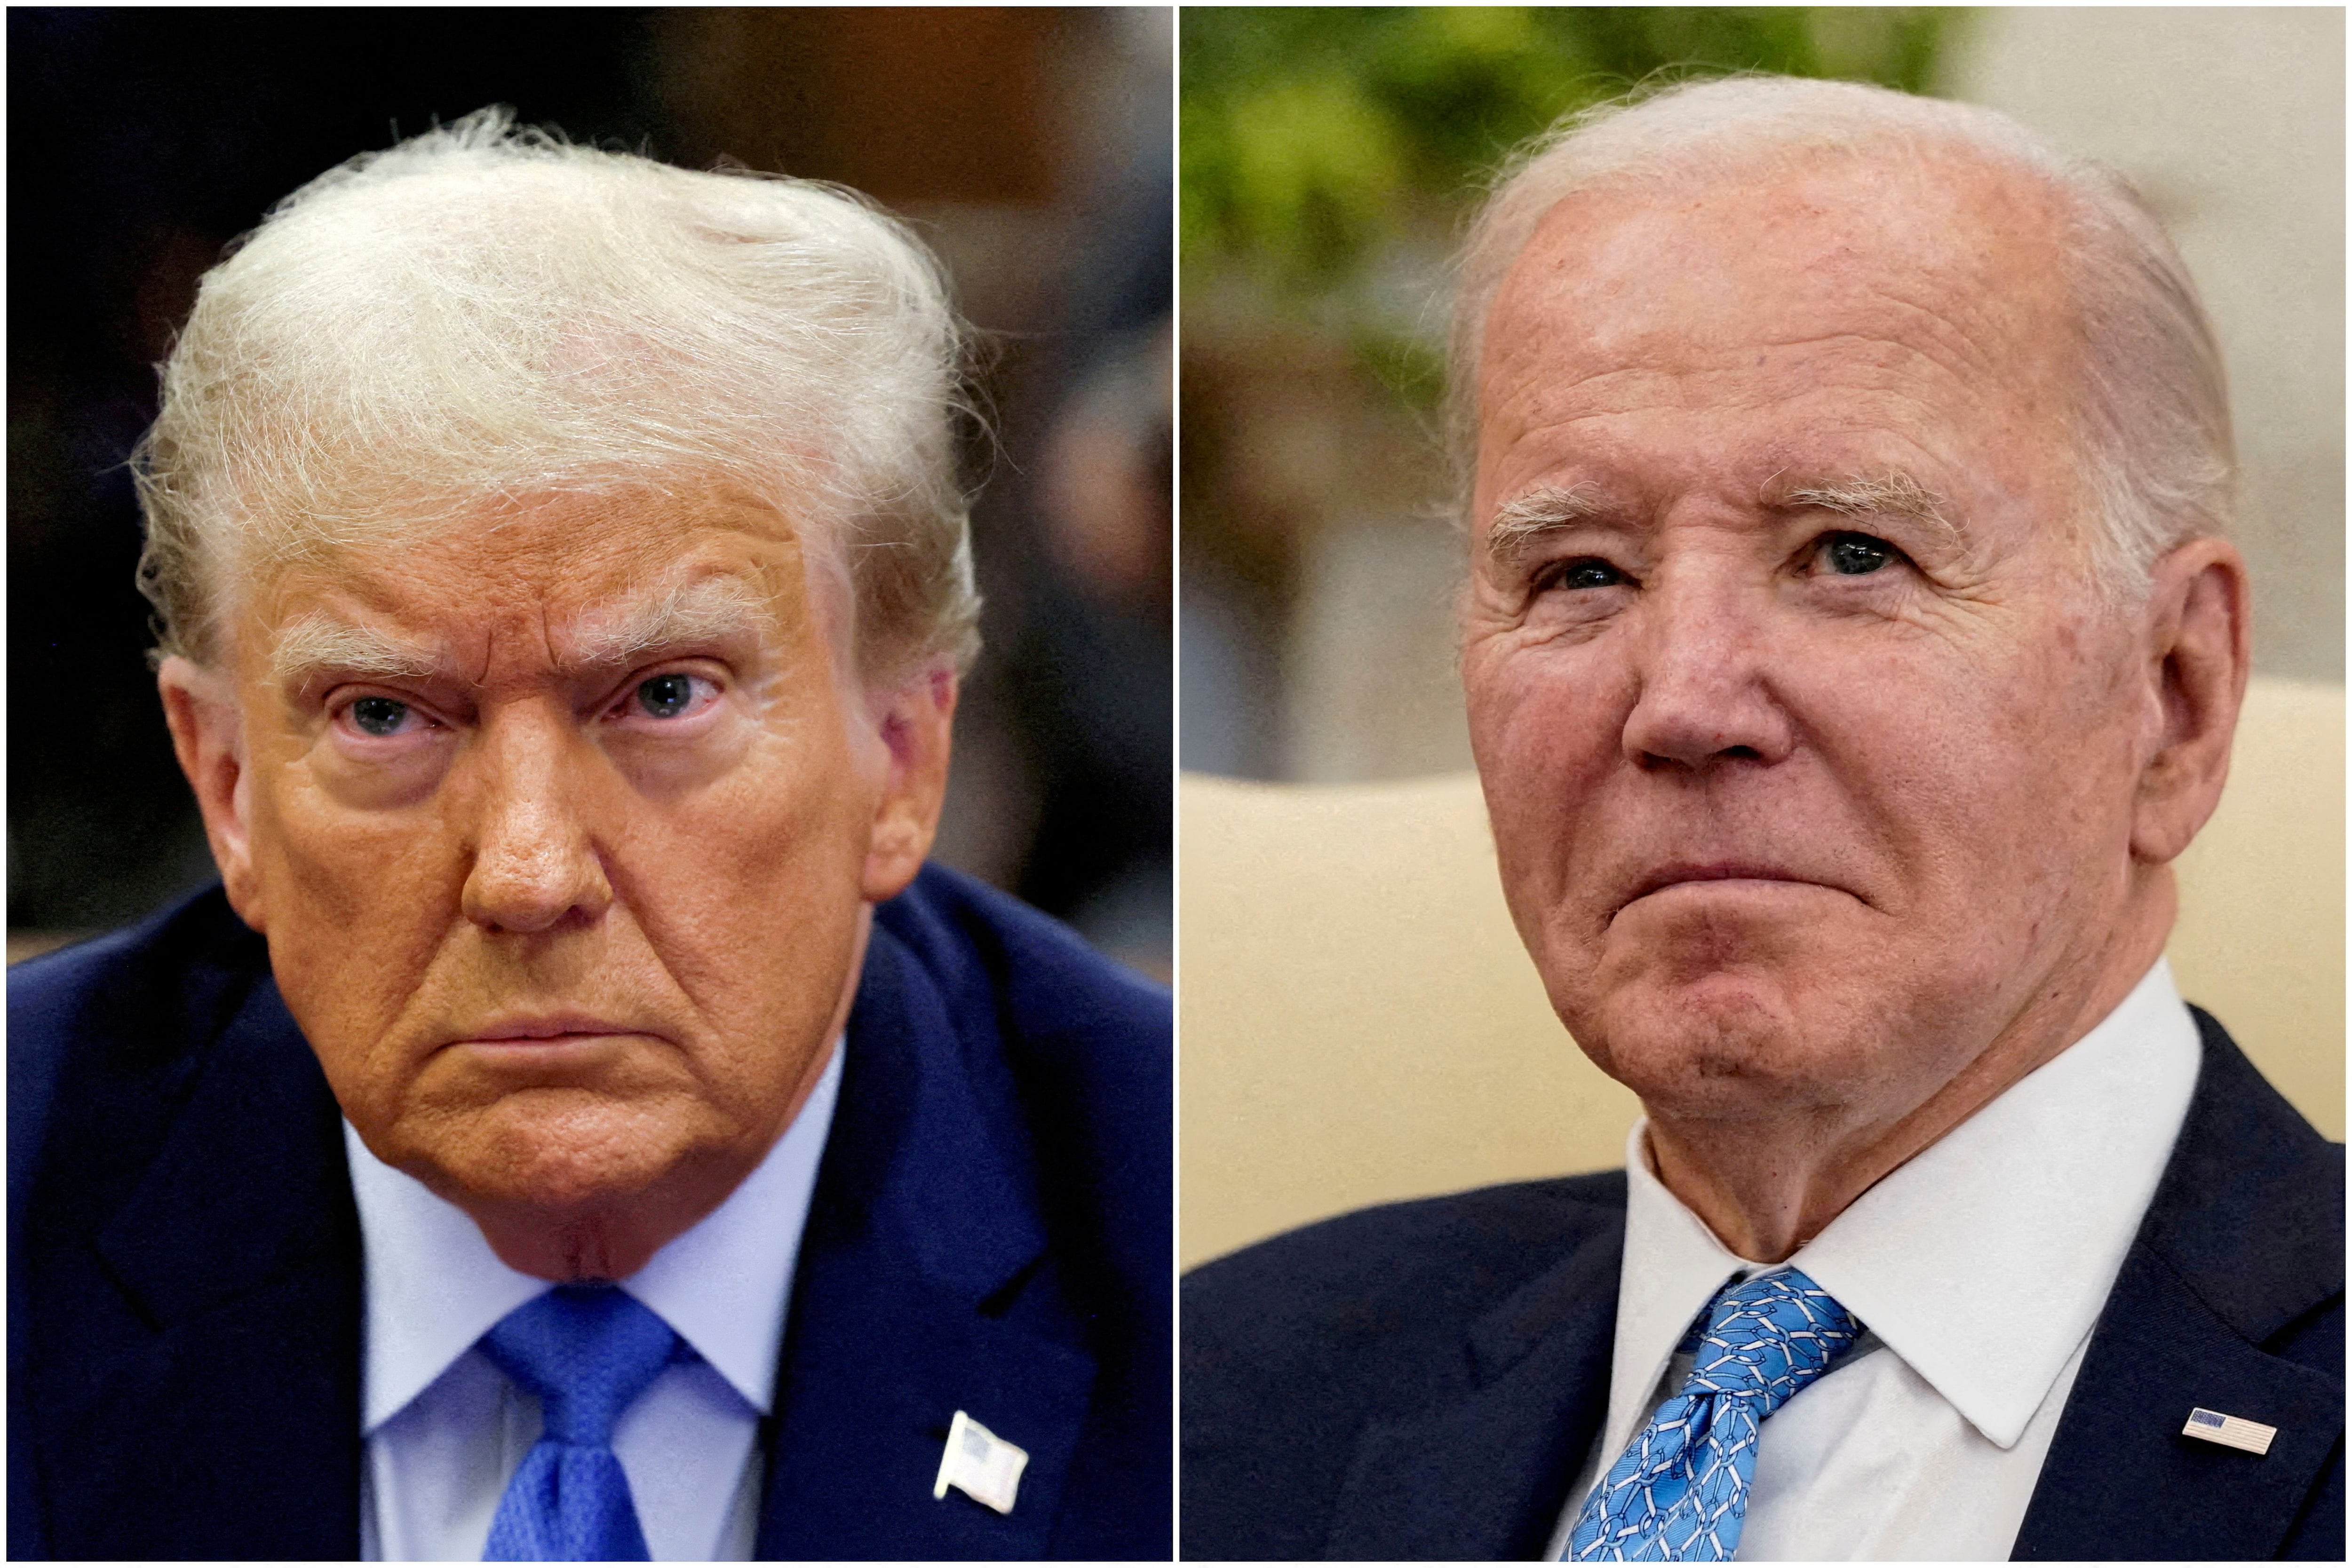 FILE PHOTO: Combination picture showing former U.S. President Donald Trump attending the Trump Organization civil fraud trial, in New York State Supreme Court in the Manhattan borough of New York City, U.S., November 6, 2023 and U.S. President Joe Biden participating in a meeting with Italy's Prime Minister Giorgia Meloni in the Oval Office at the White House in Washington, U.S., March 1, 2024. REUTERS/Brendan McDermid and Elizabeth Frantz/File Photo